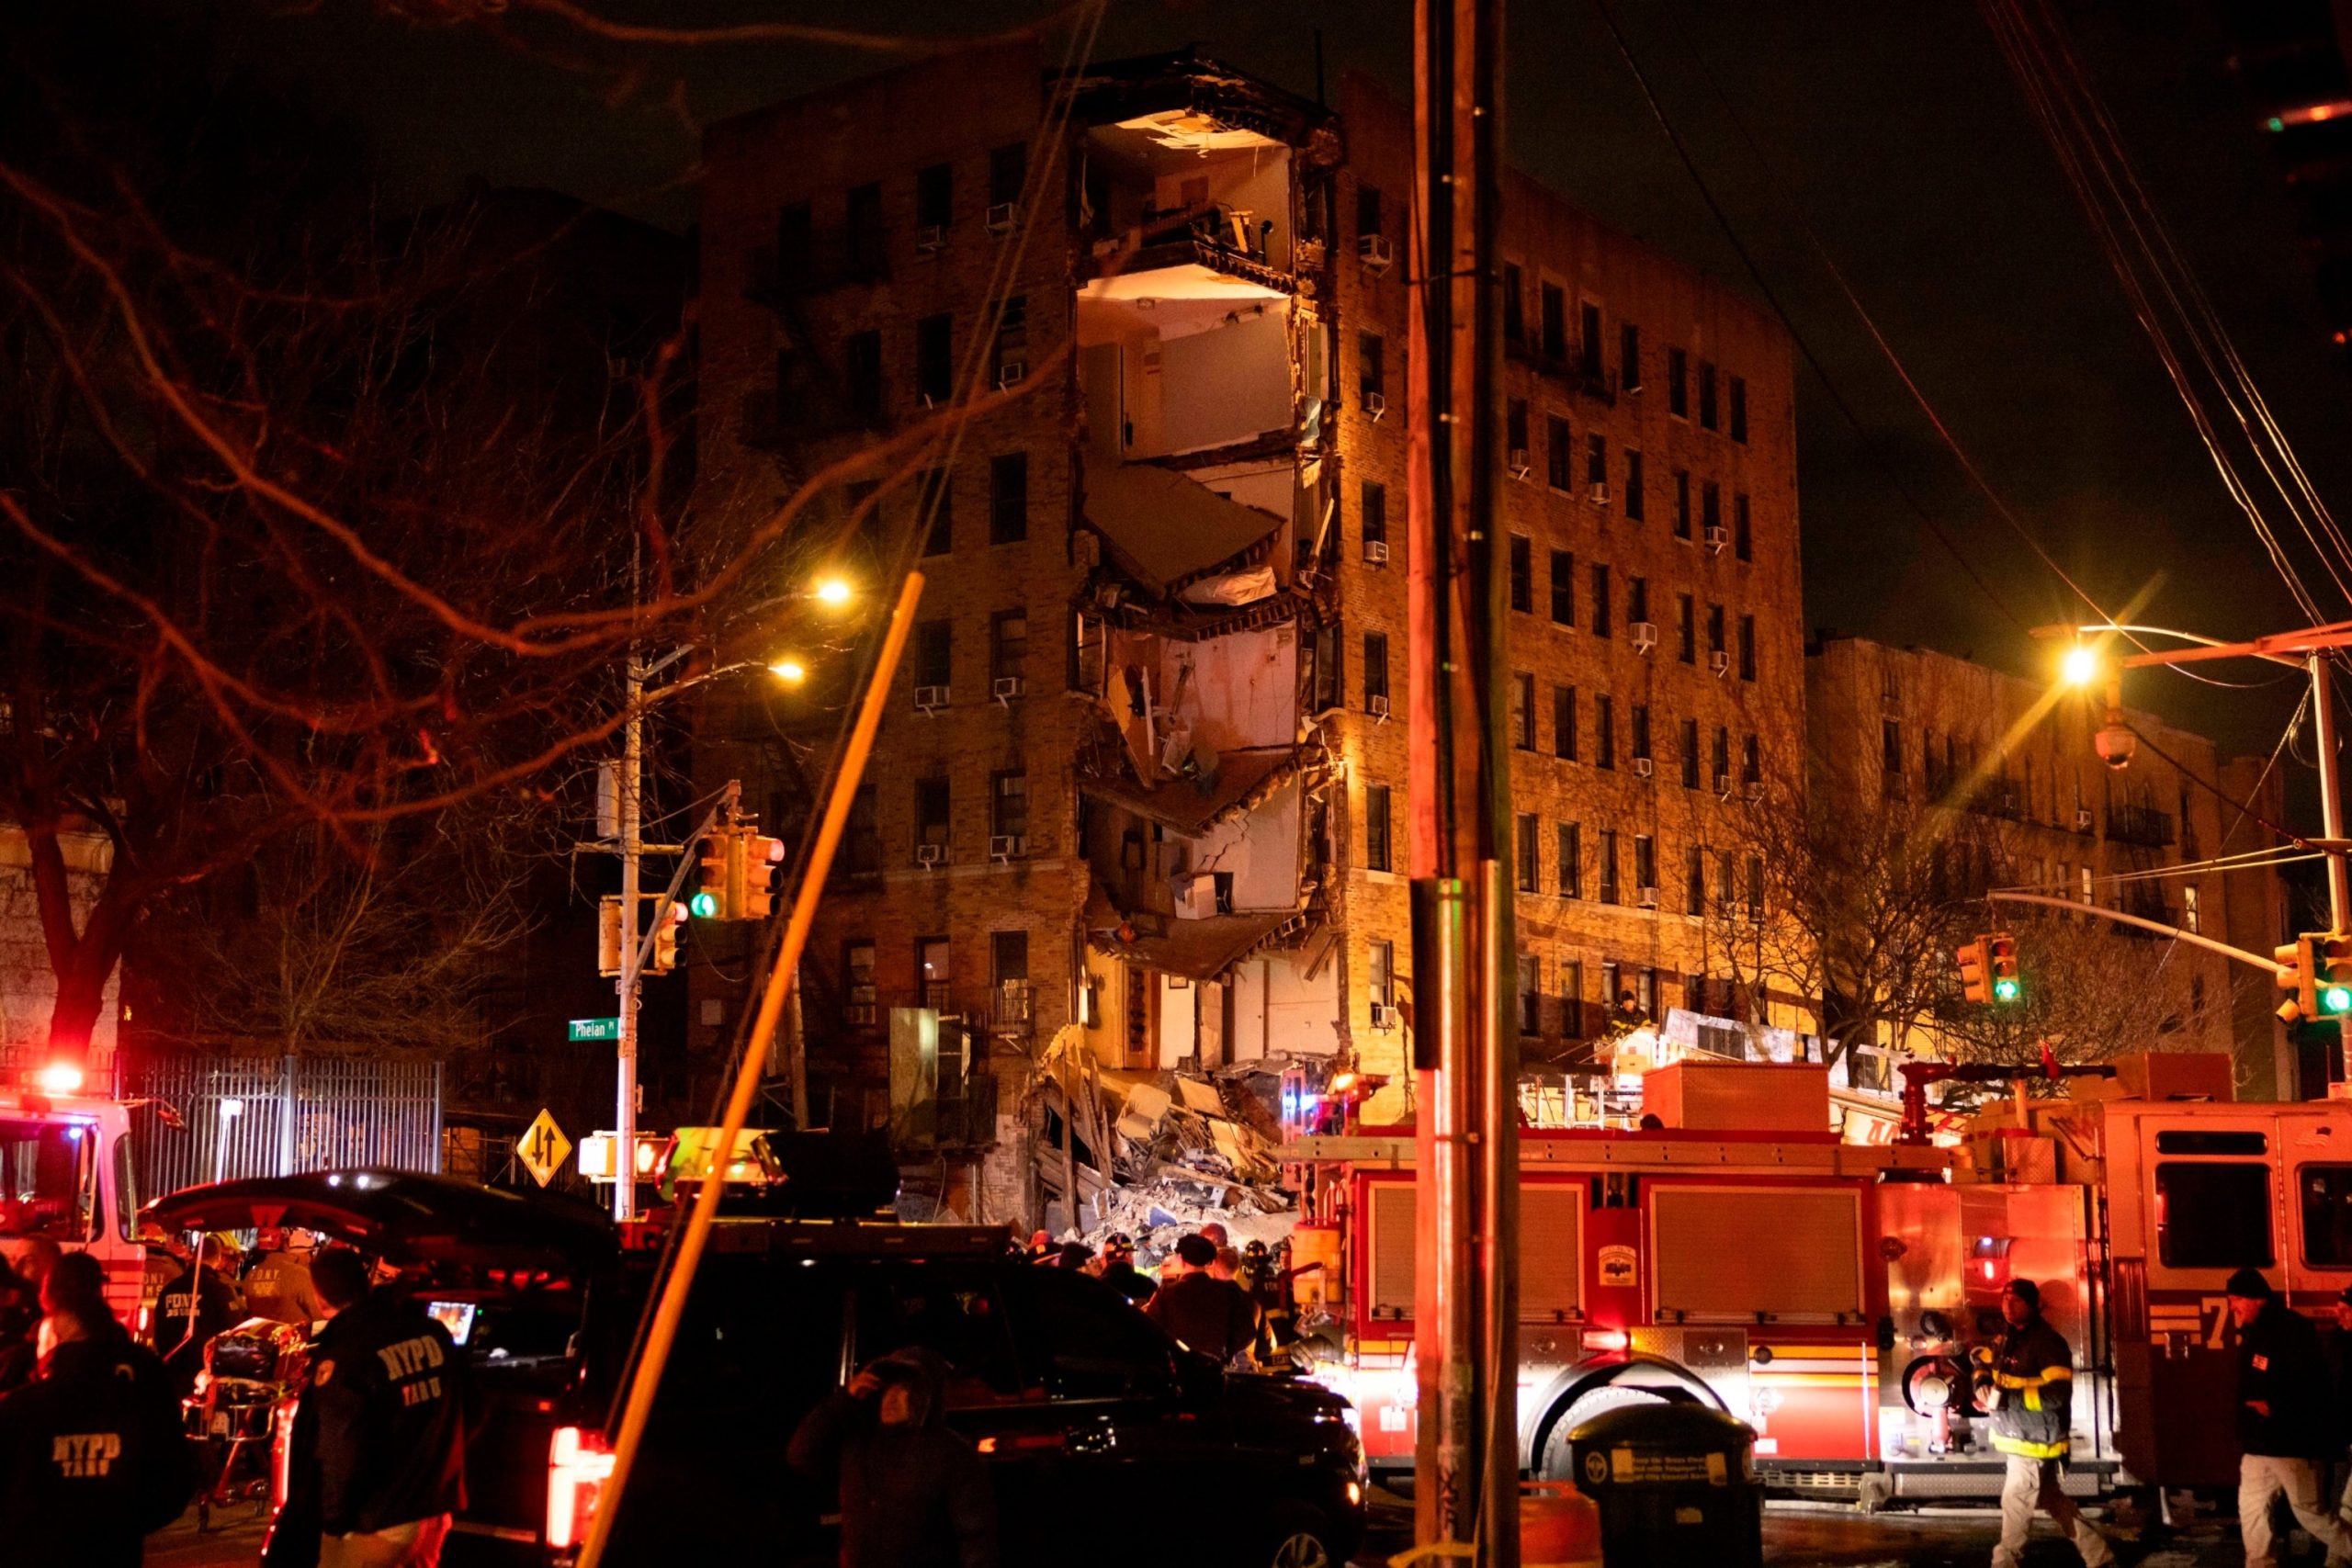 NY Fire Department reports no victims found under rubble of partial building collapse in Bronx